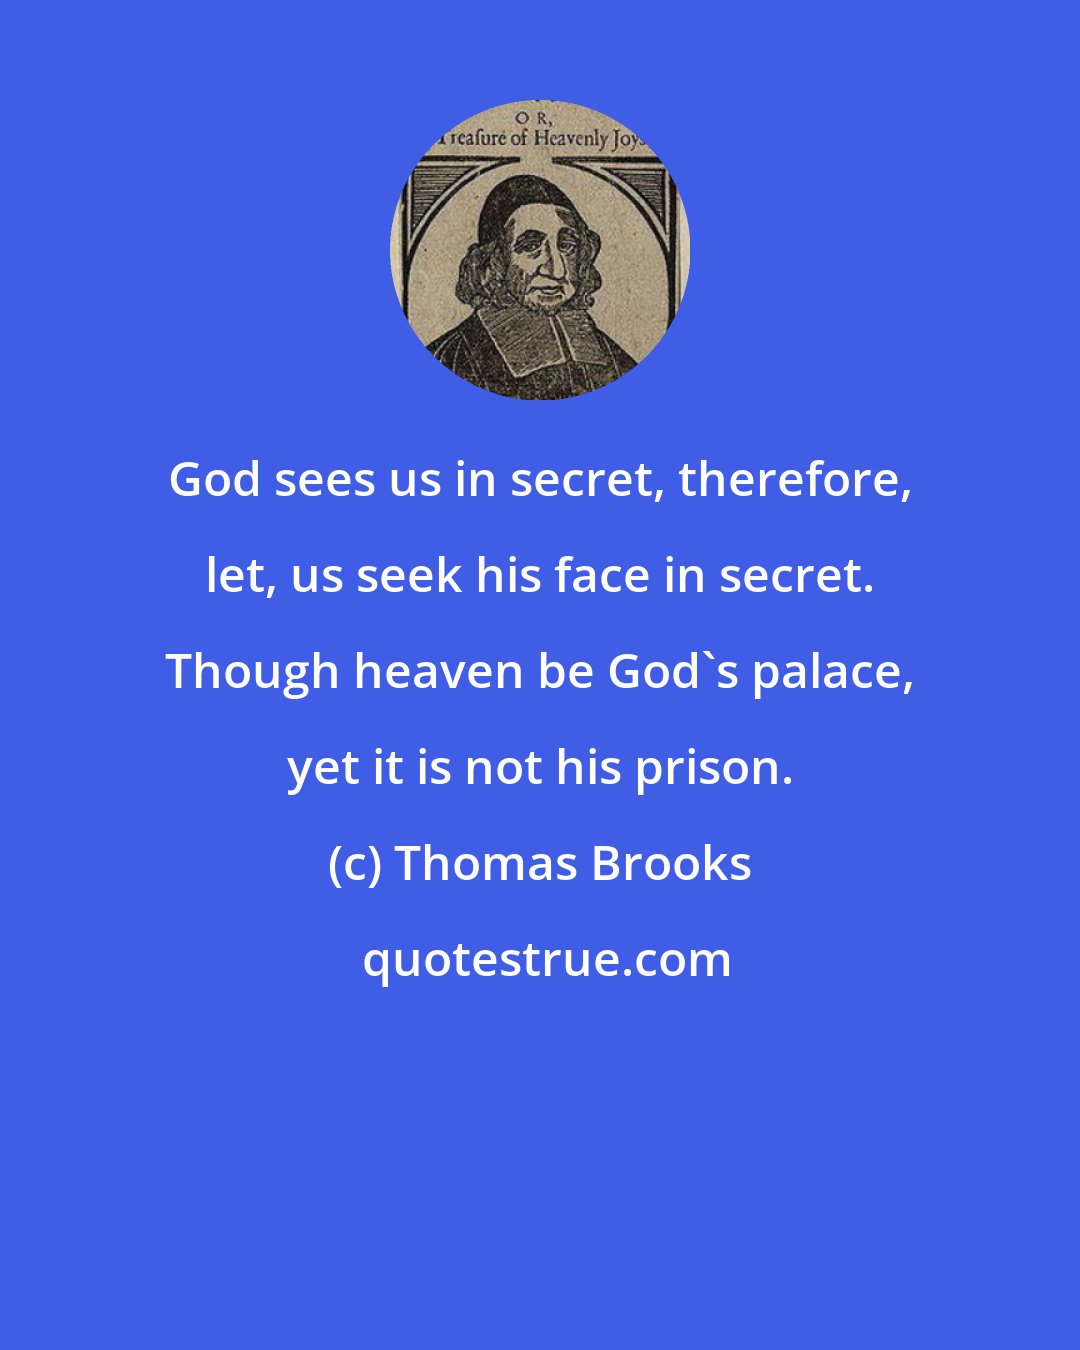 Thomas Brooks: God sees us in secret, therefore, let, us seek his face in secret. Though heaven be God's palace, yet it is not his prison.